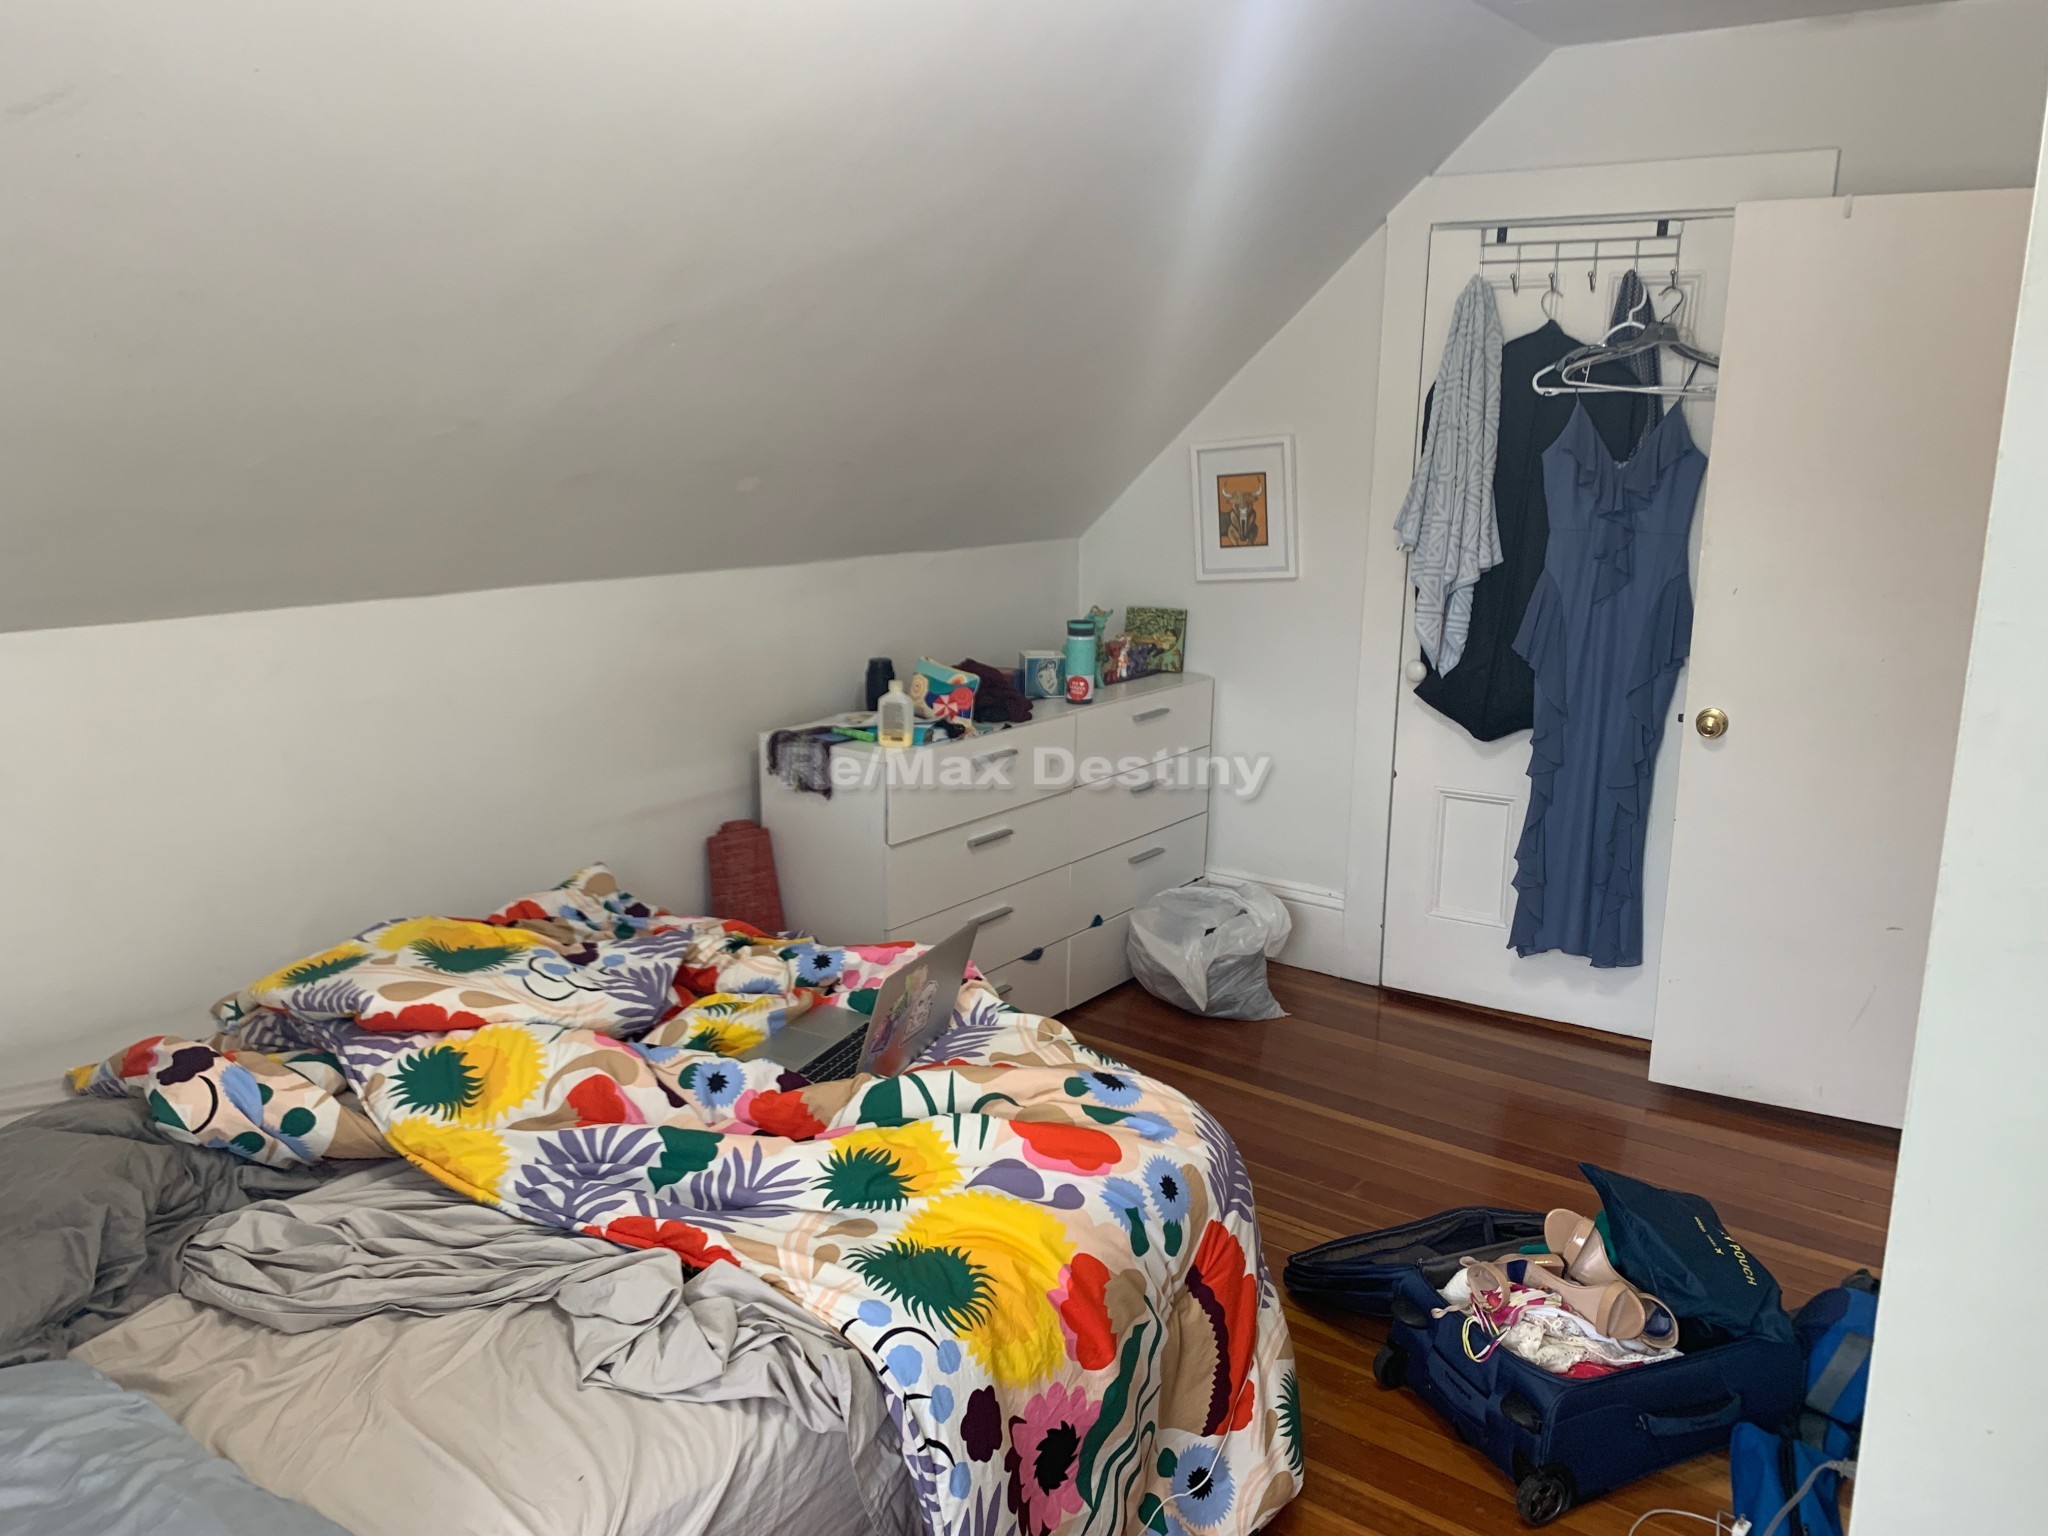 Photos of apartment on Morrison,Somerville MA 02144